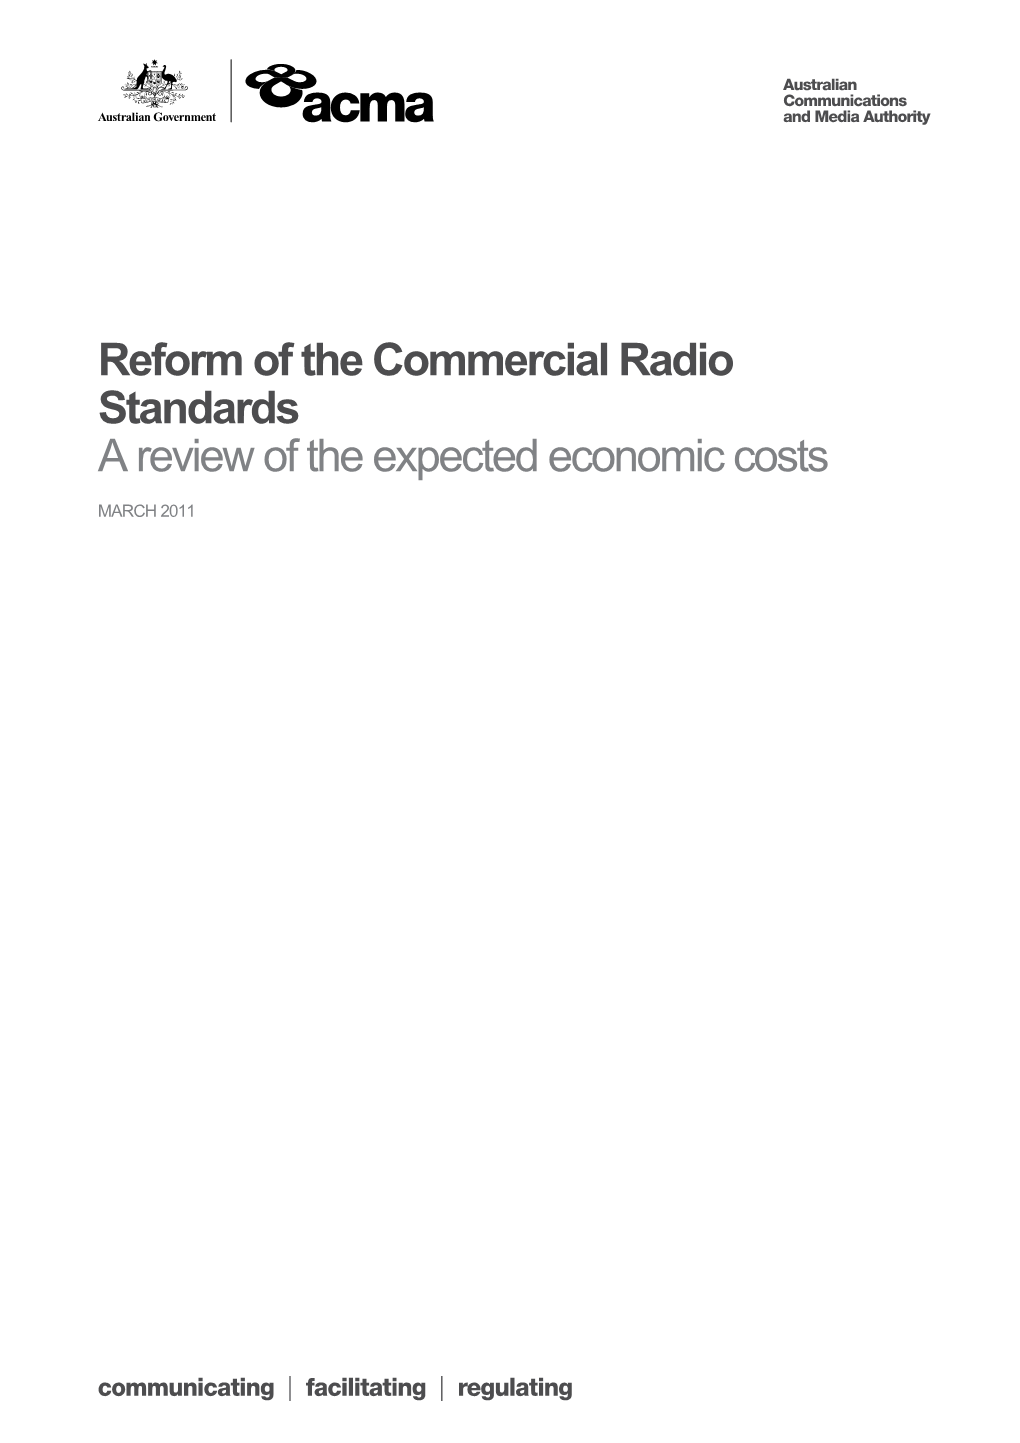 Reform of the Commercial Radio Standards - Review of Expected Economic Costs